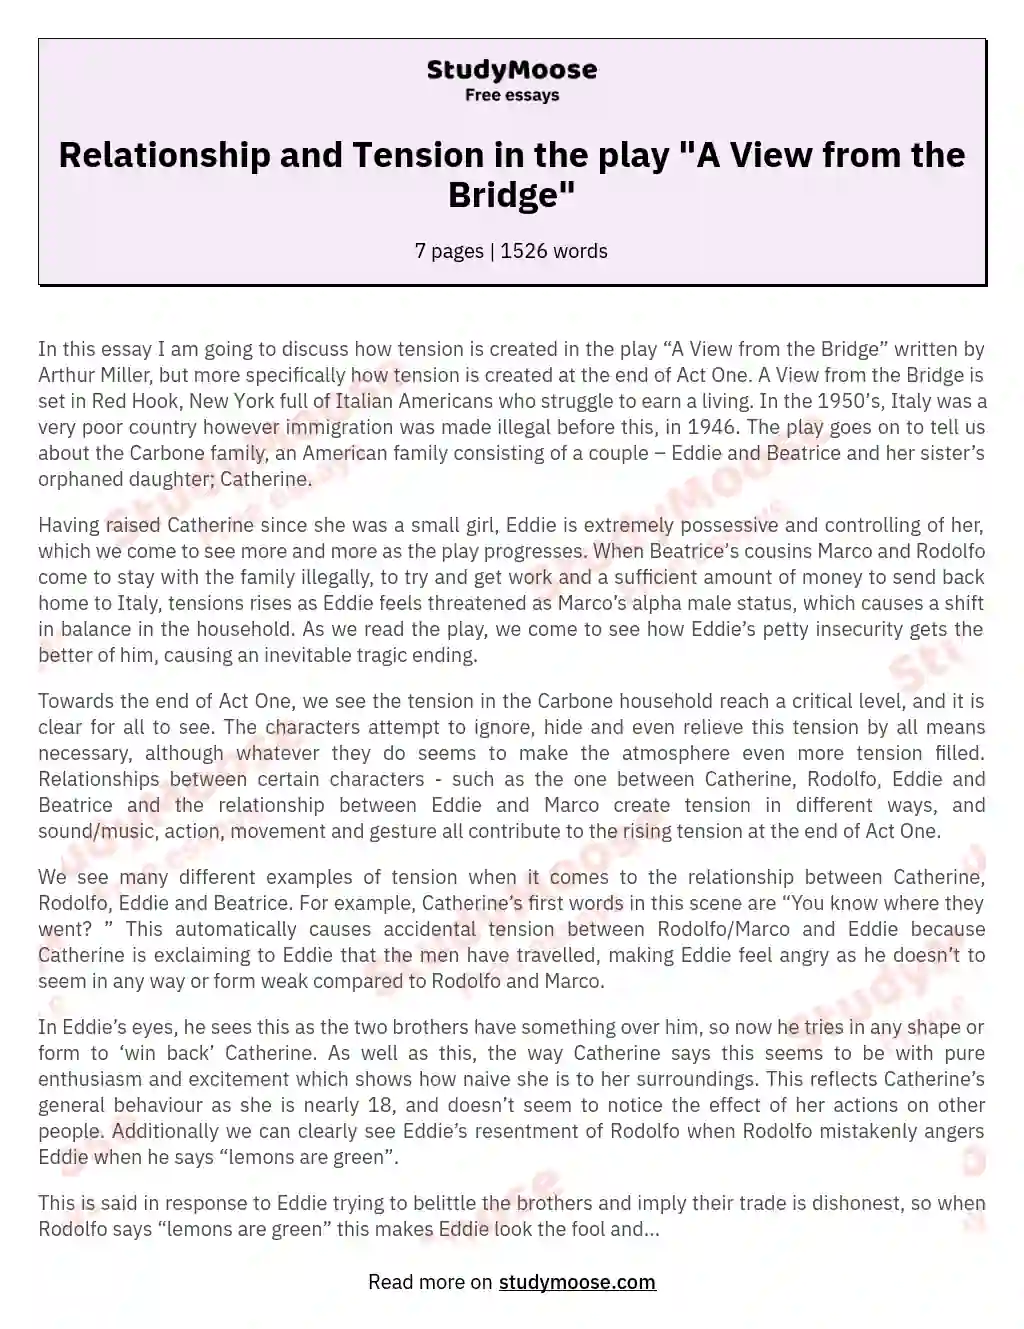 Relationship and Tension in the play "A View from the Bridge" essay